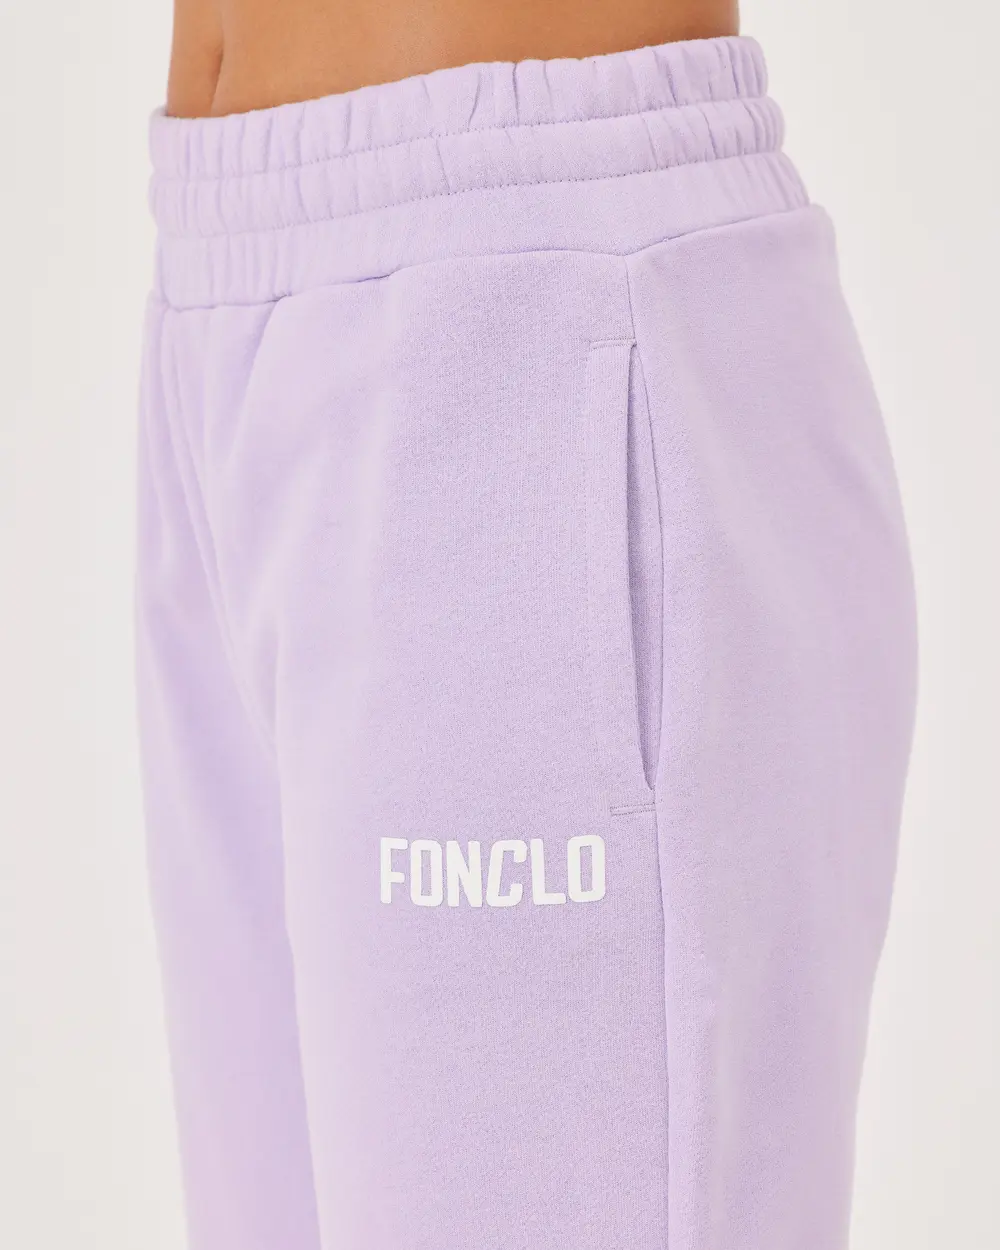 Jogger Sweatpants with Pockets